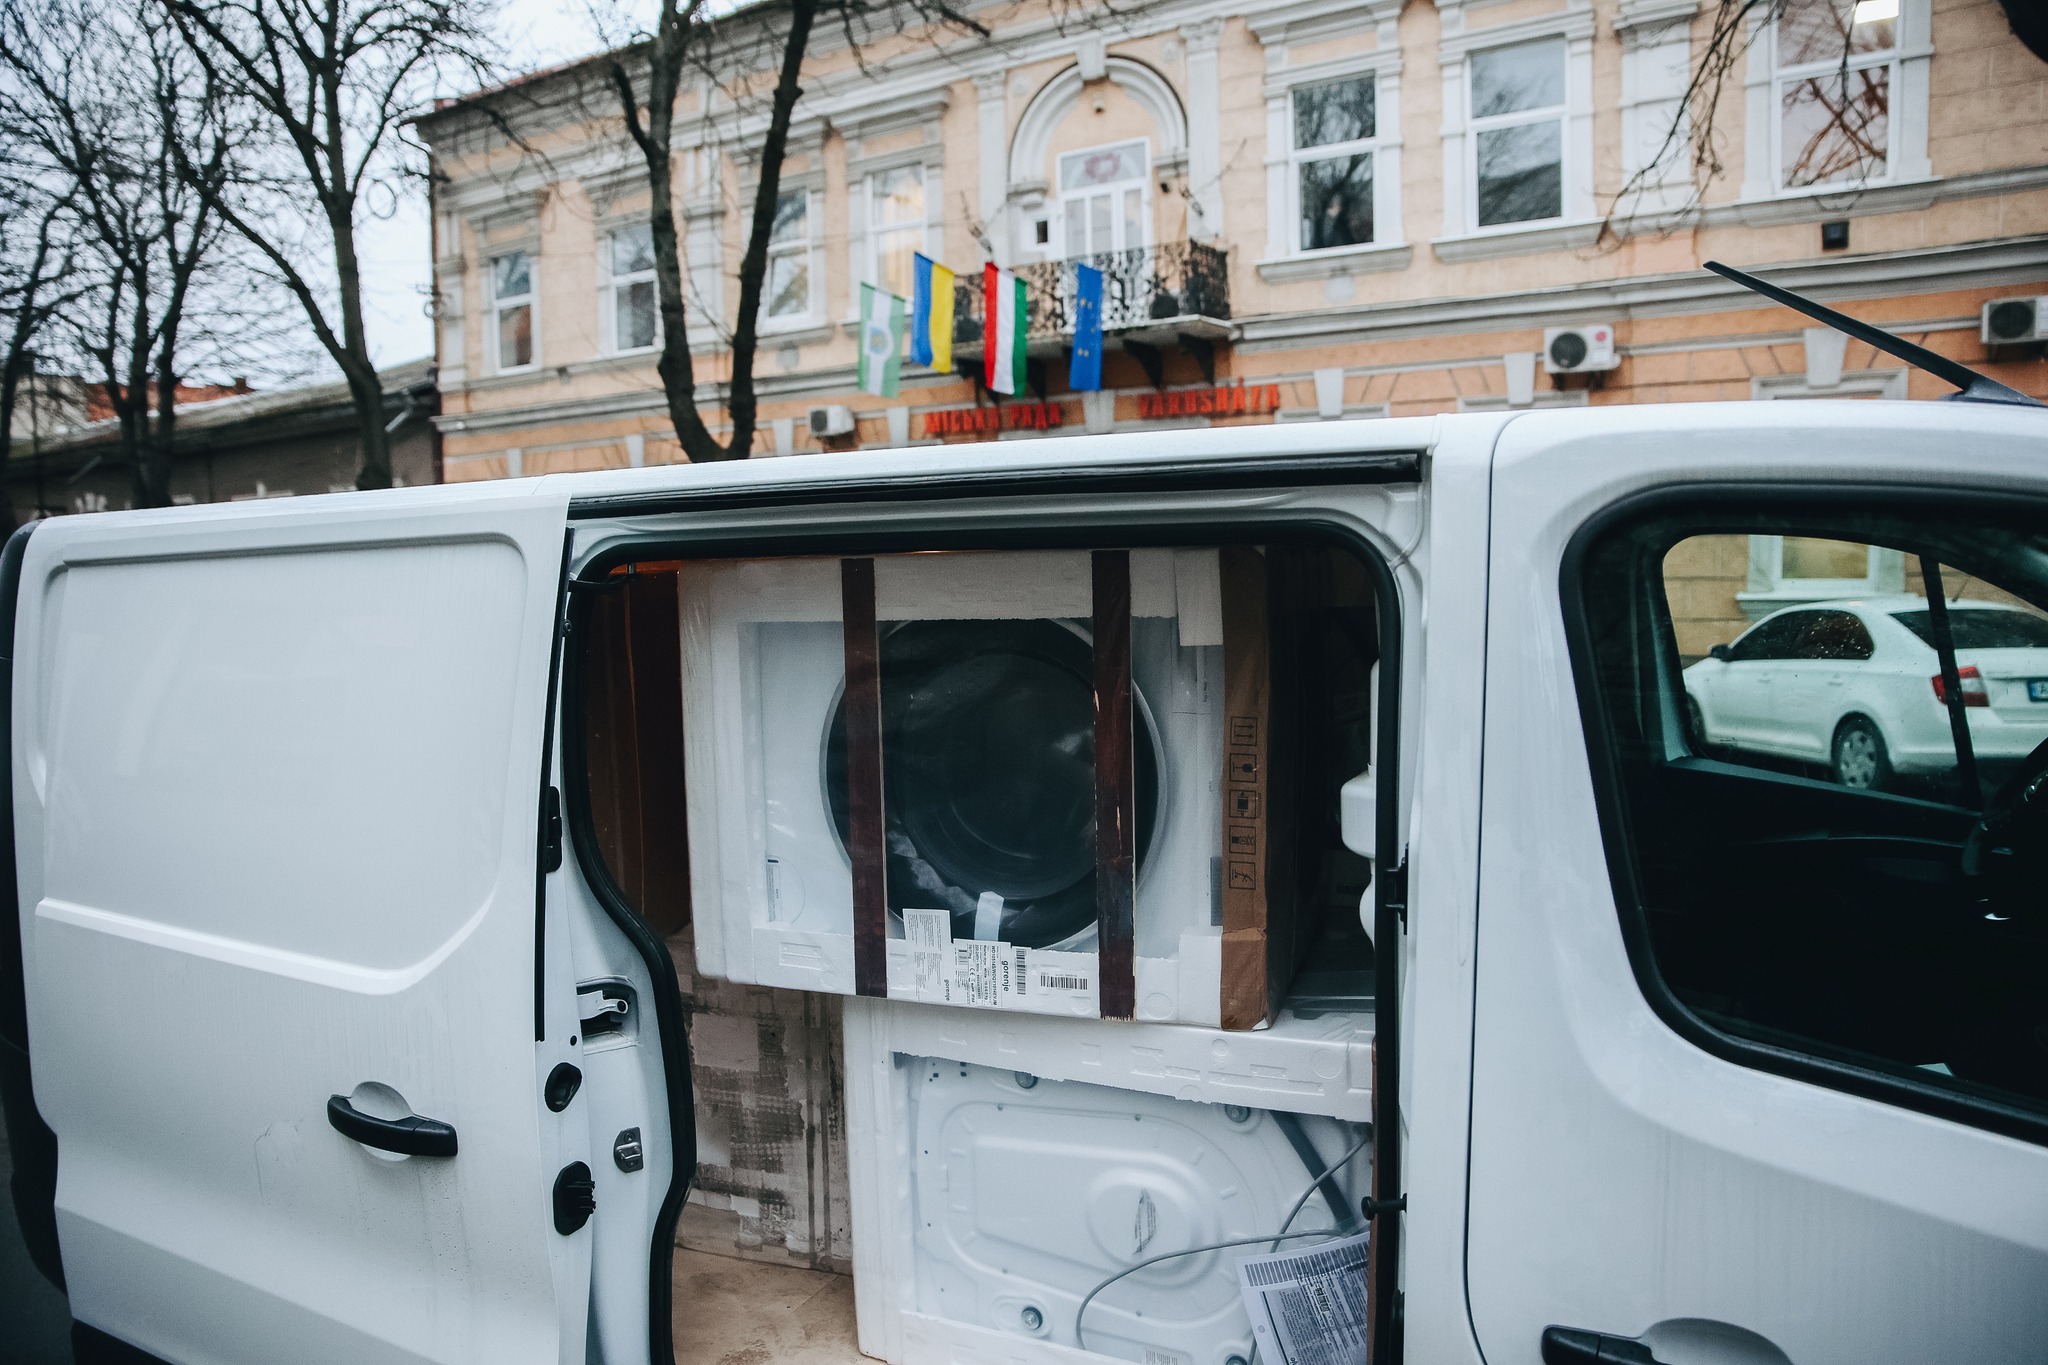 Mayor Karácsony Delivers Washer-Driers to Sister City of Budapest